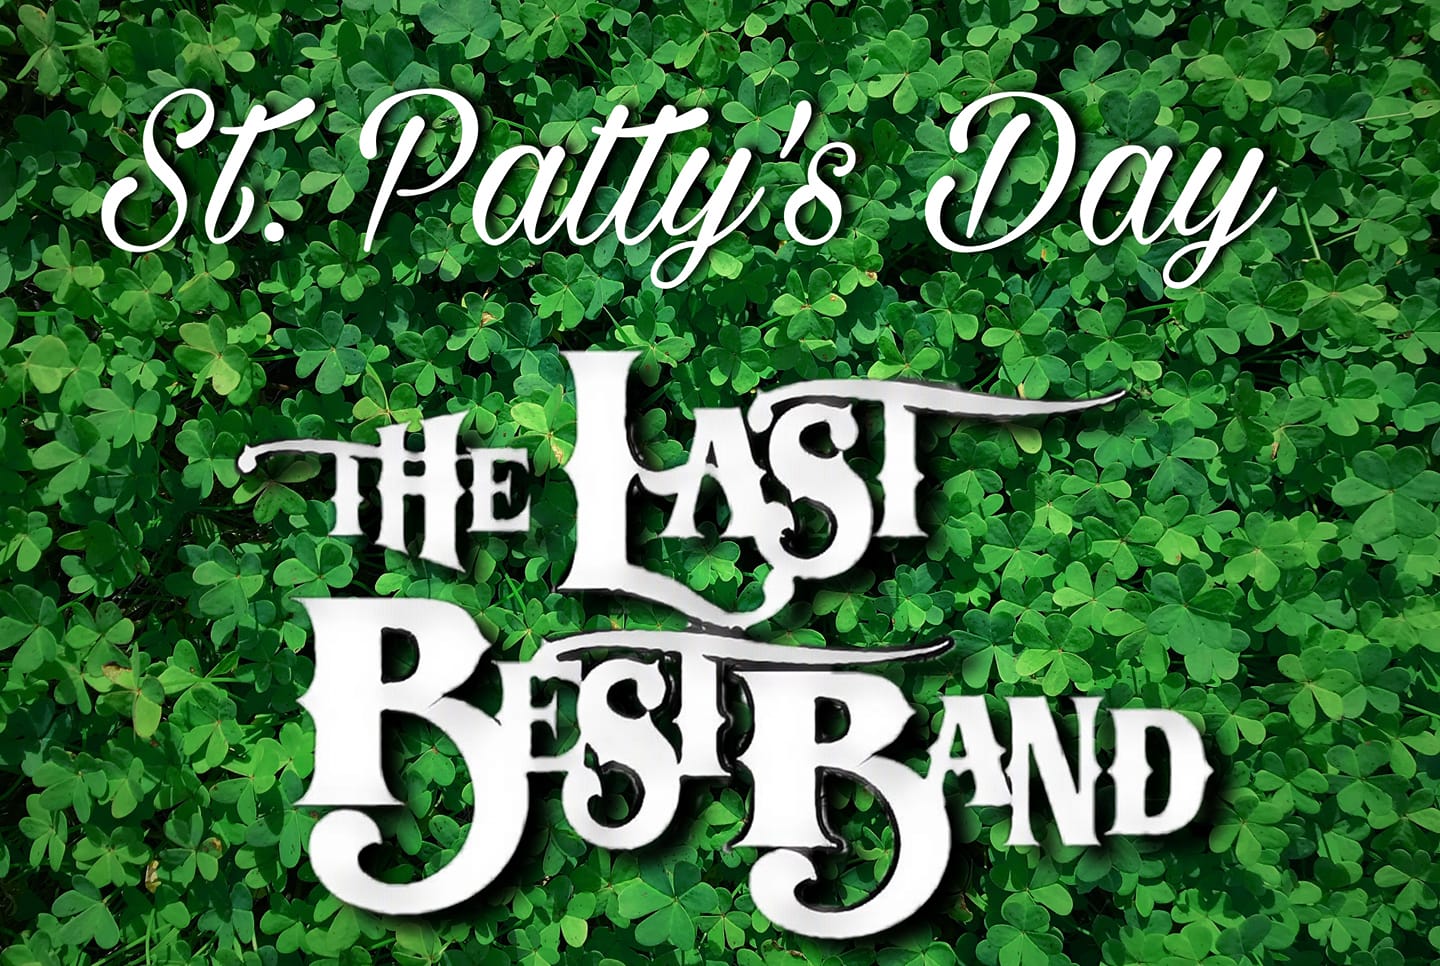 The Last Best Band will be having fun this St. Patrick's at Marley'$ Bar